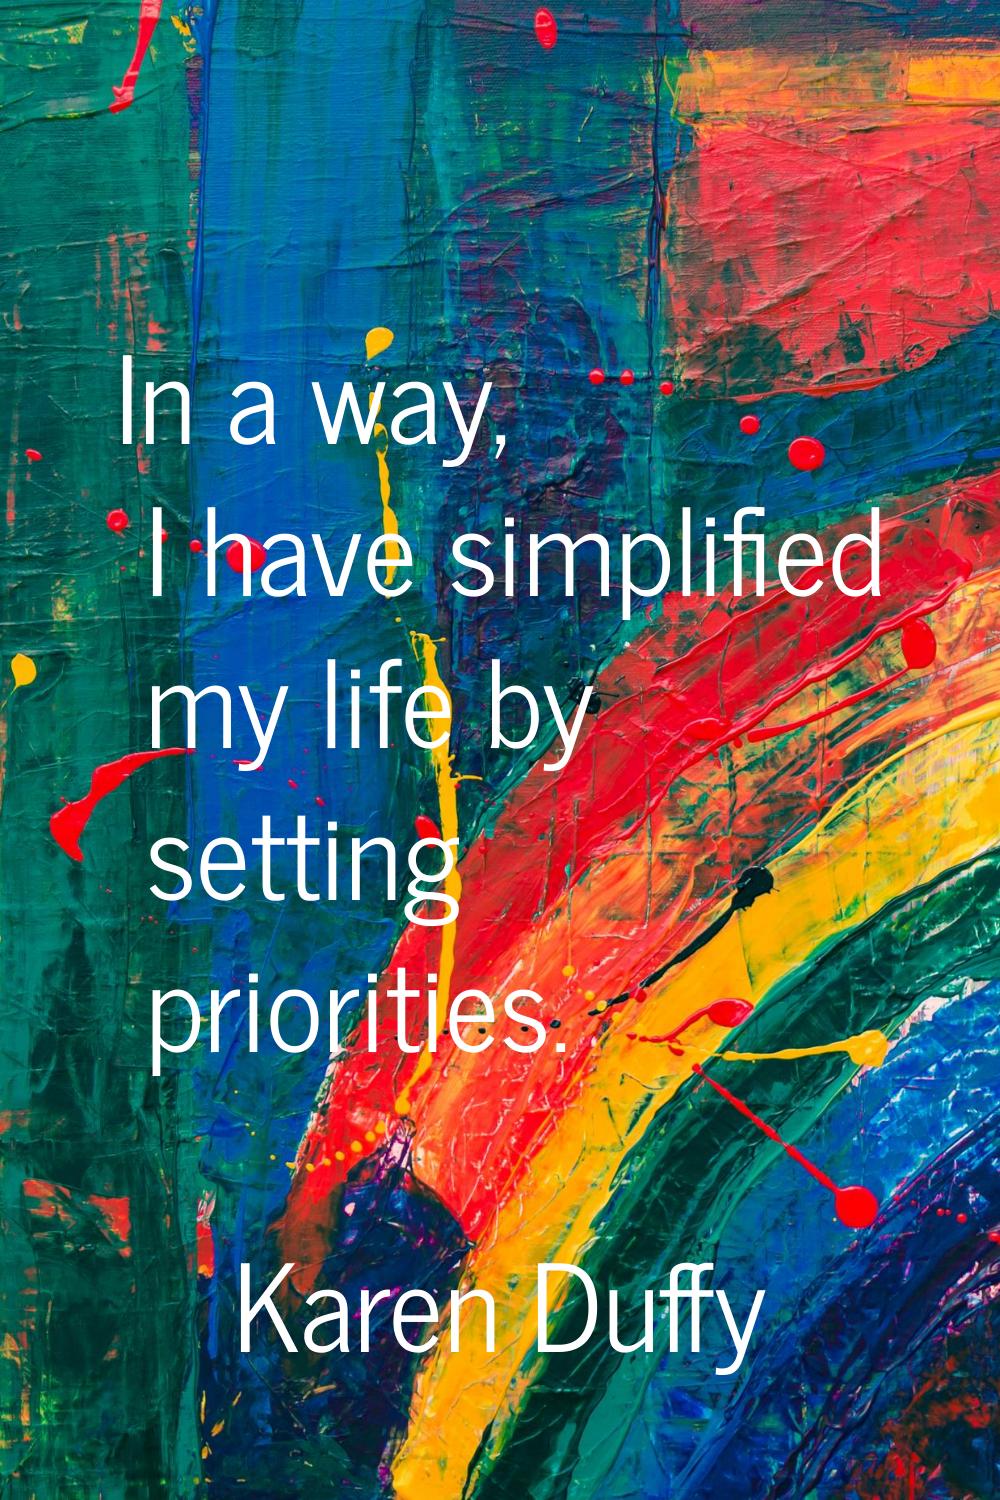 In a way, I have simplified my life by setting priorities.